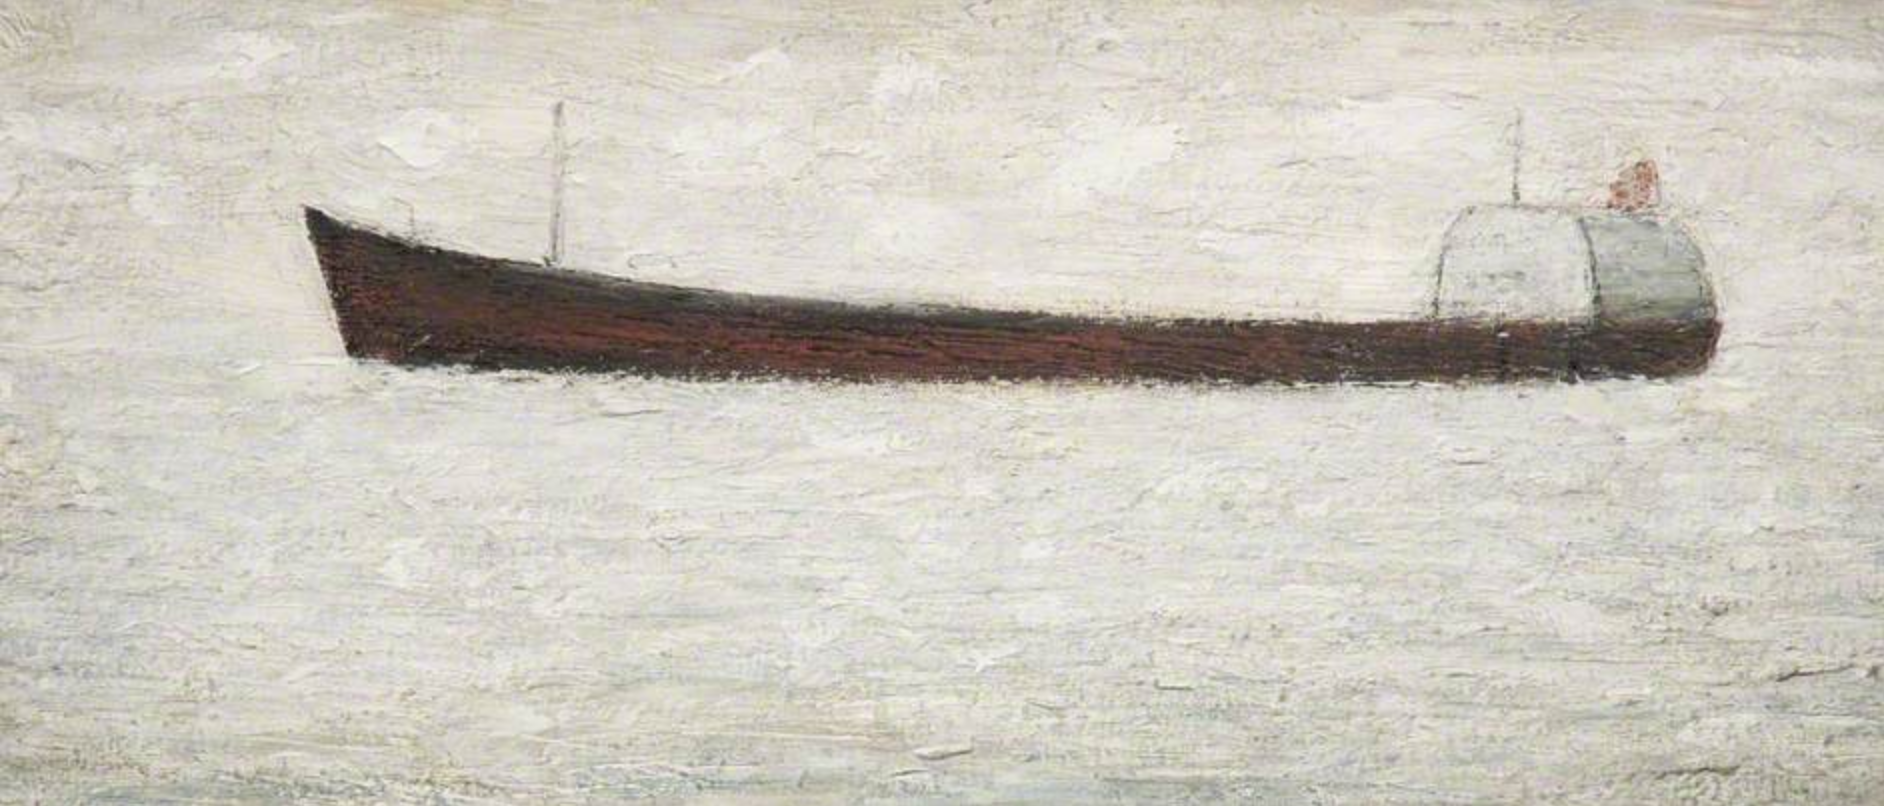 Waiting for the tide, South Shields (1967) by Laurence Stephen Lowry (1887 - 1976), English artist.